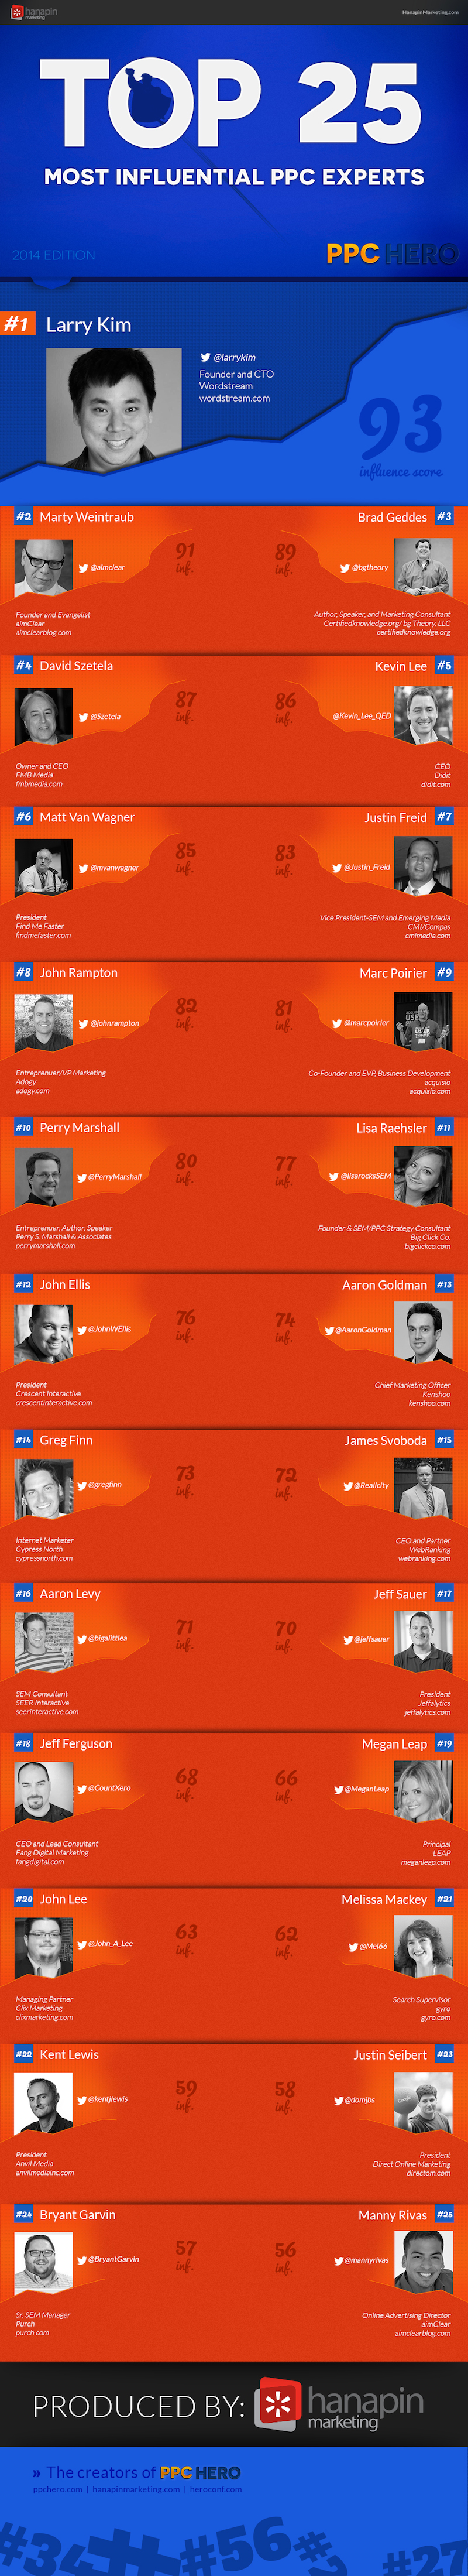 PPC-Heros-Top-25-Most-Influential-PPC-Experts-2014-Infographic